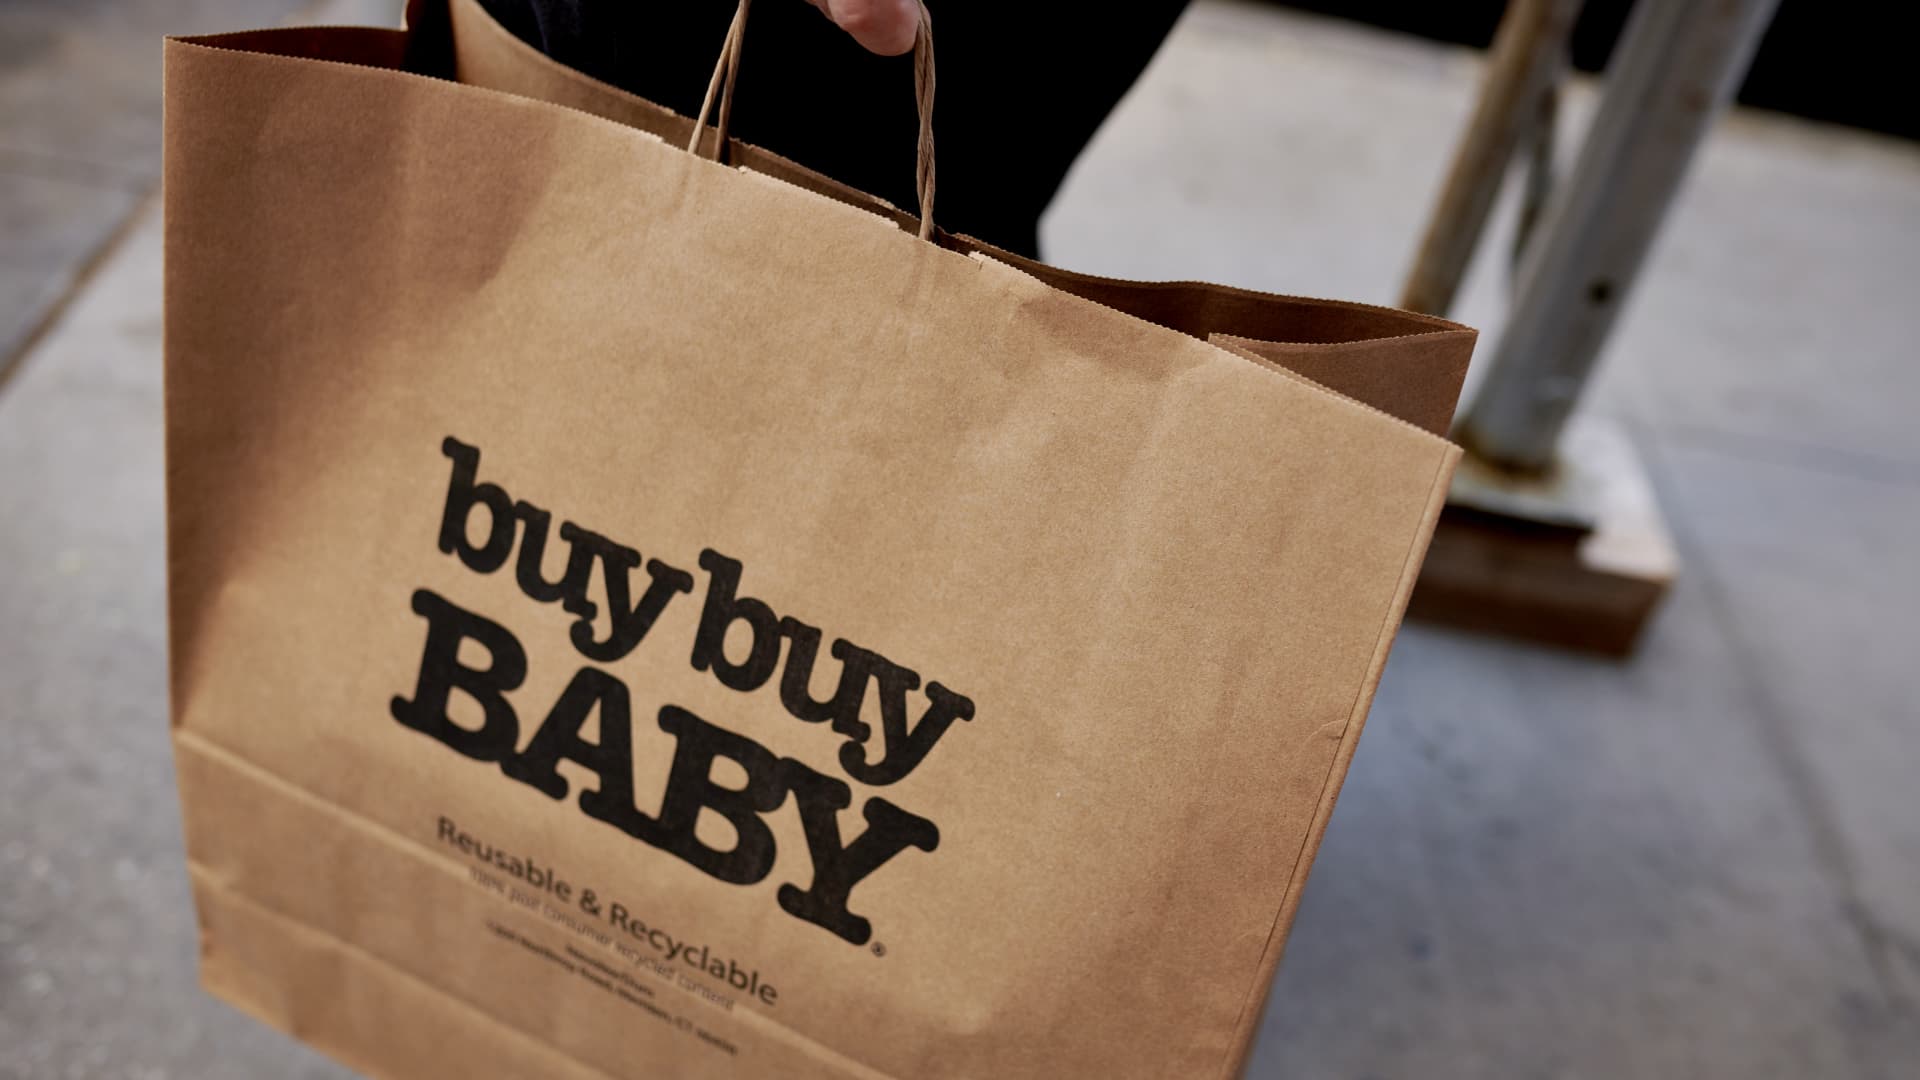 Buybuy Baby a bright spot for Bed Bath & Beyond reports steep drop in sales against tough comparisons – CNBC